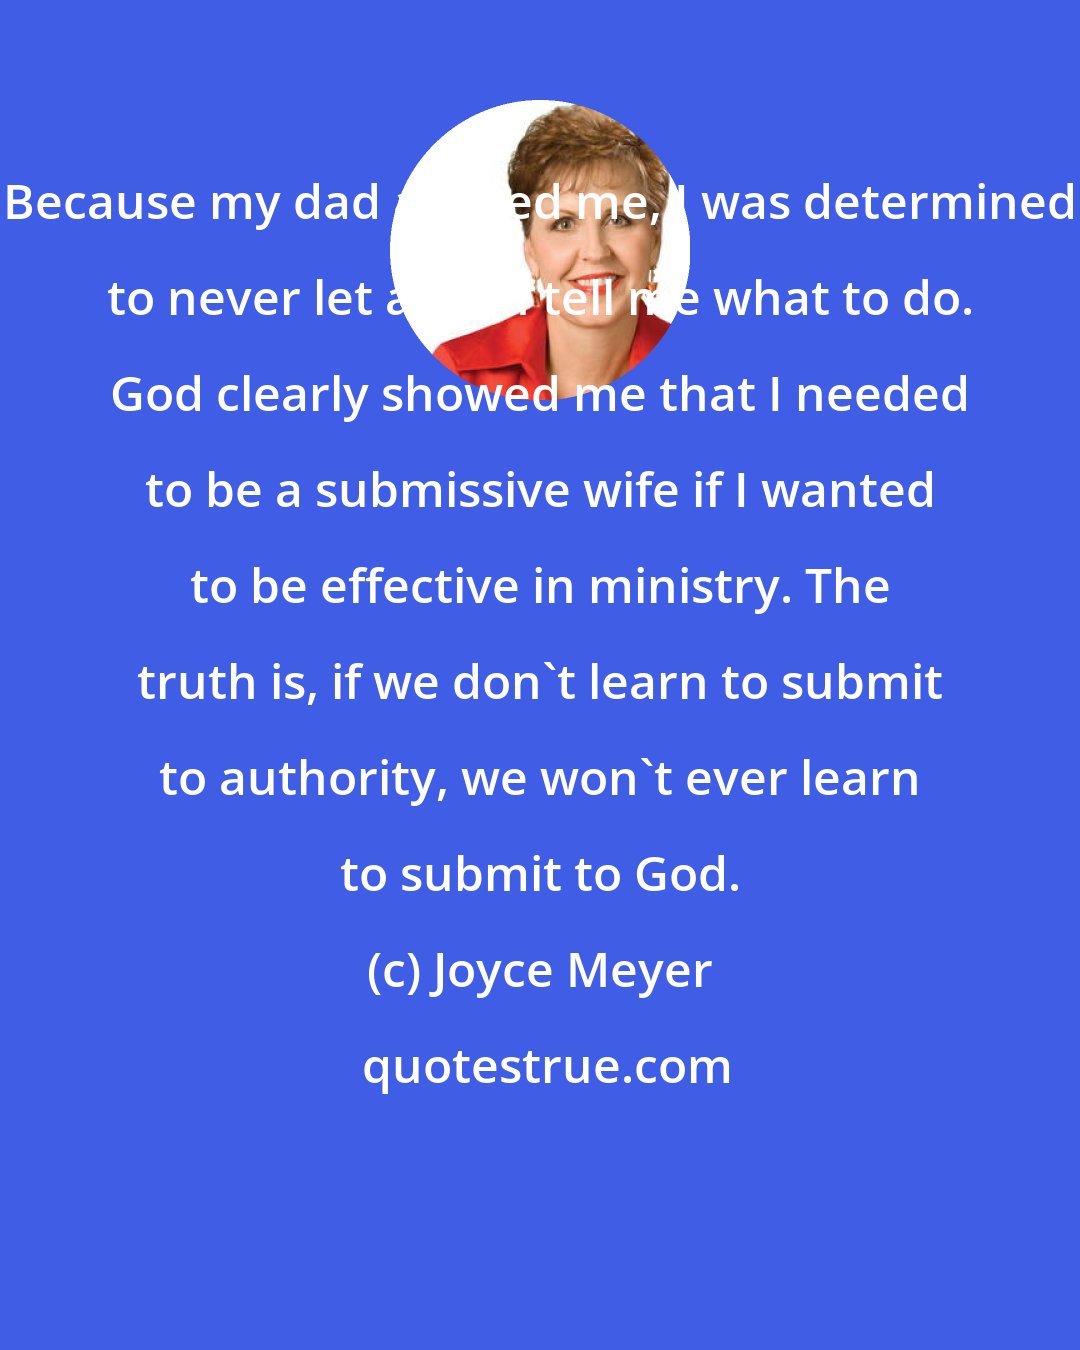 Joyce Meyer: Because my dad abused me, I was determined to never let a man tell me what to do. God clearly showed me that I needed to be a submissive wife if I wanted to be effective in ministry. The truth is, if we don't learn to submit to authority, we won't ever learn to submit to God.